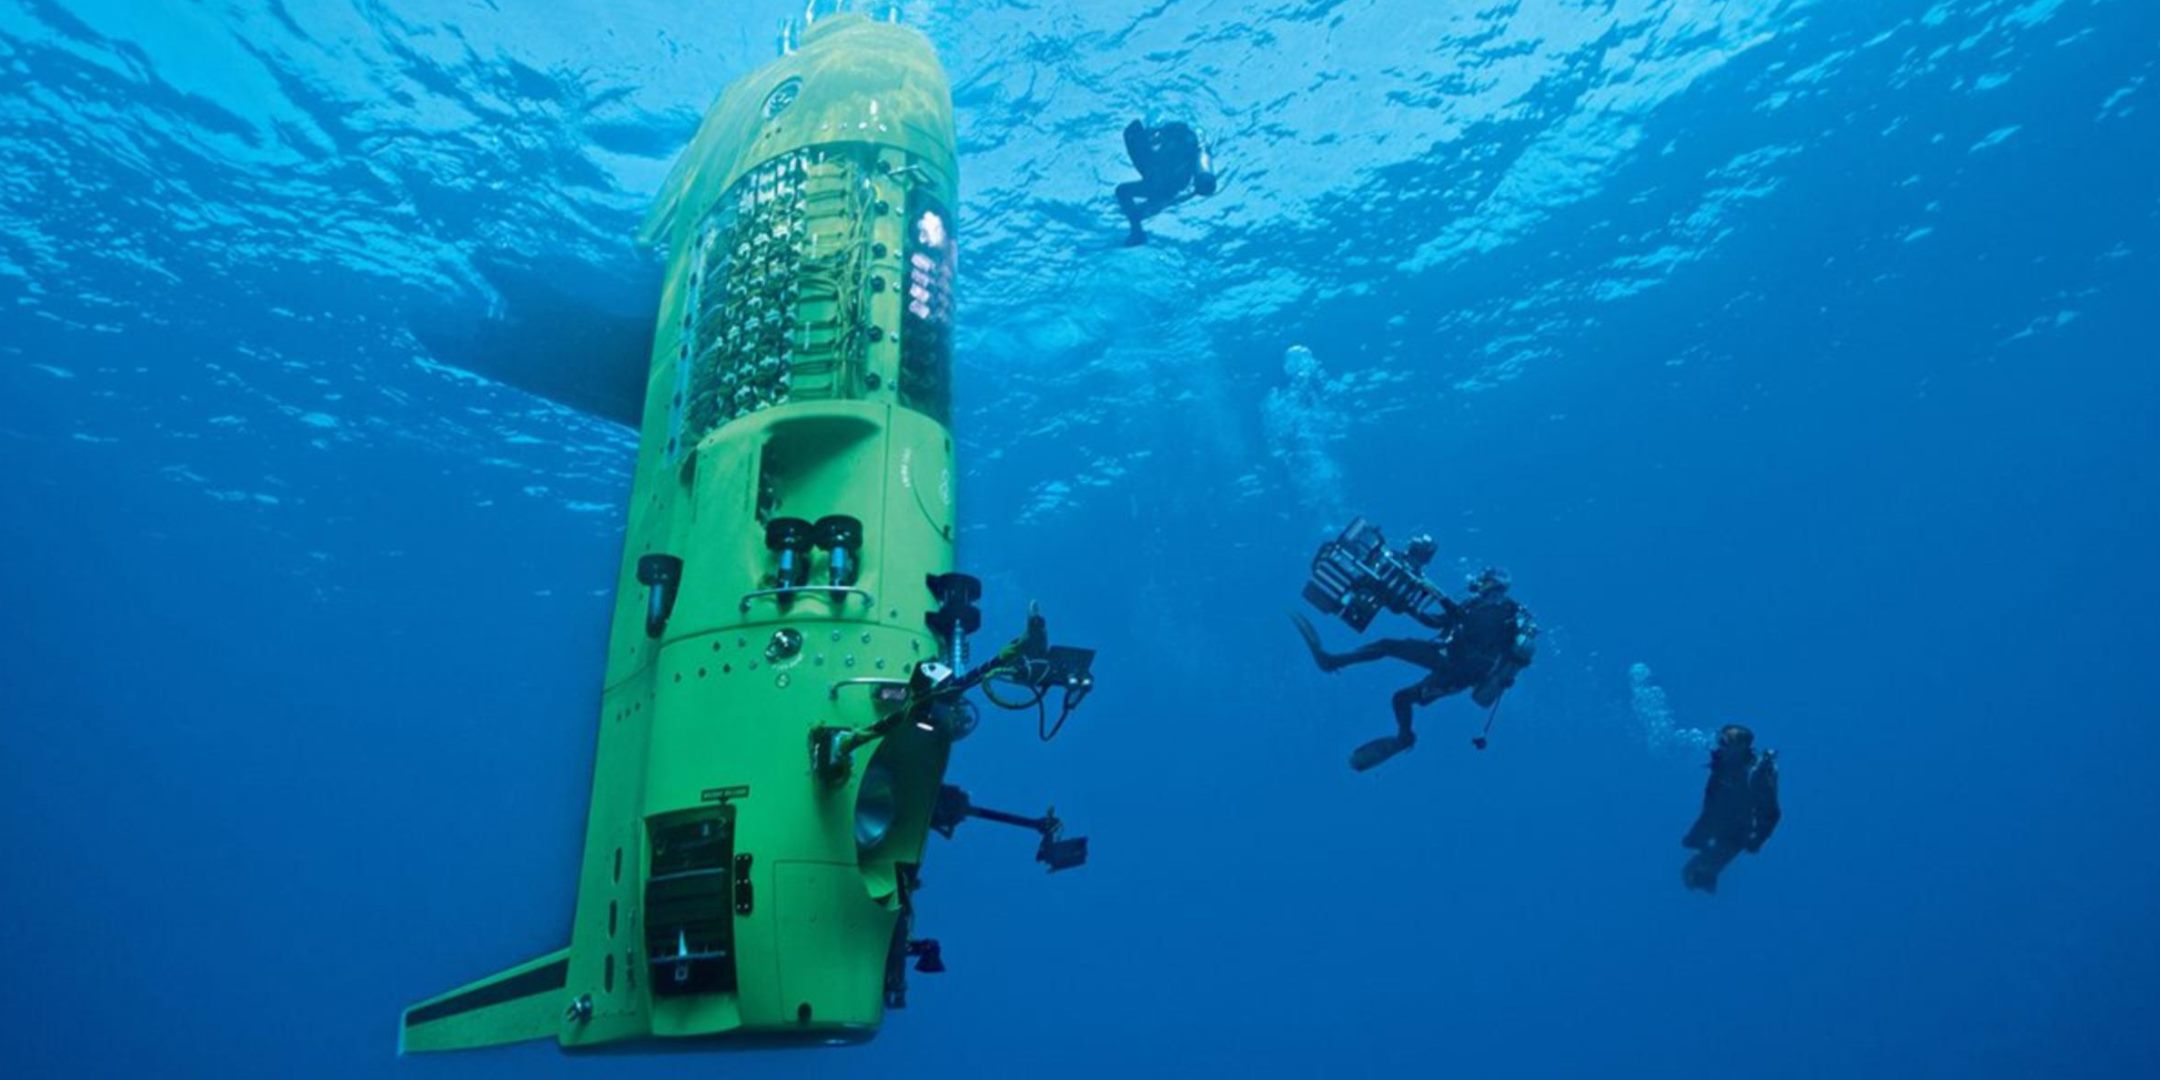 On March 26 2012 Cameron made a record-breaking solo dive to the earth’s deepest point, the bottom of the Challenger Deep in the Mariana Trench. Image: Mark Thiessen/NatGeoCreative. 